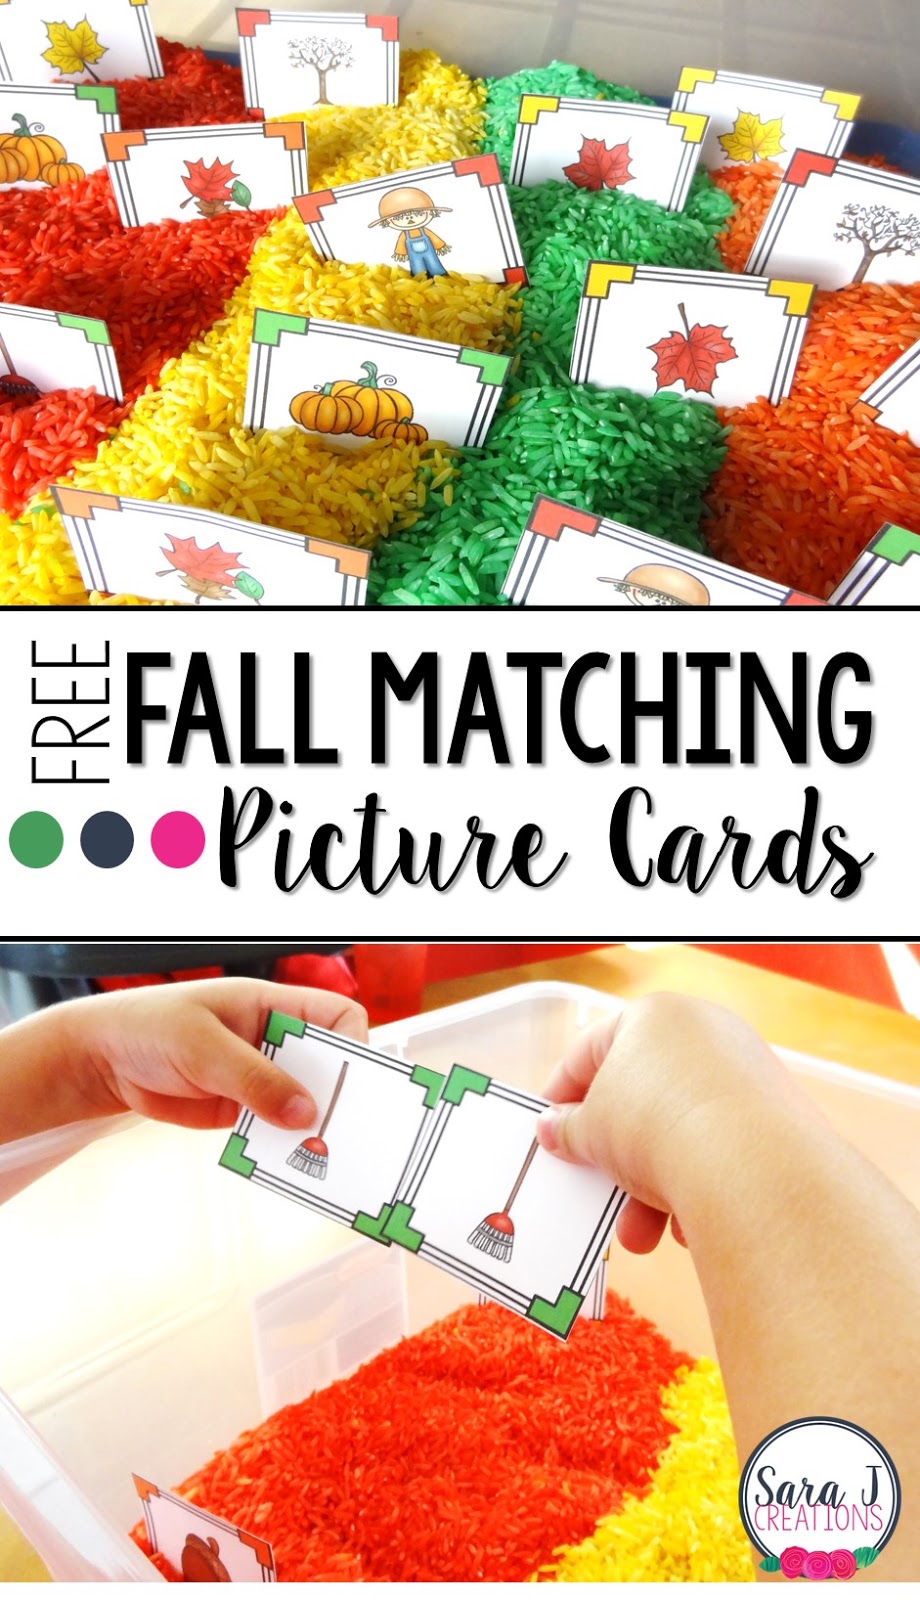 Fall sensory bin activities with free printable matching pictures card game.